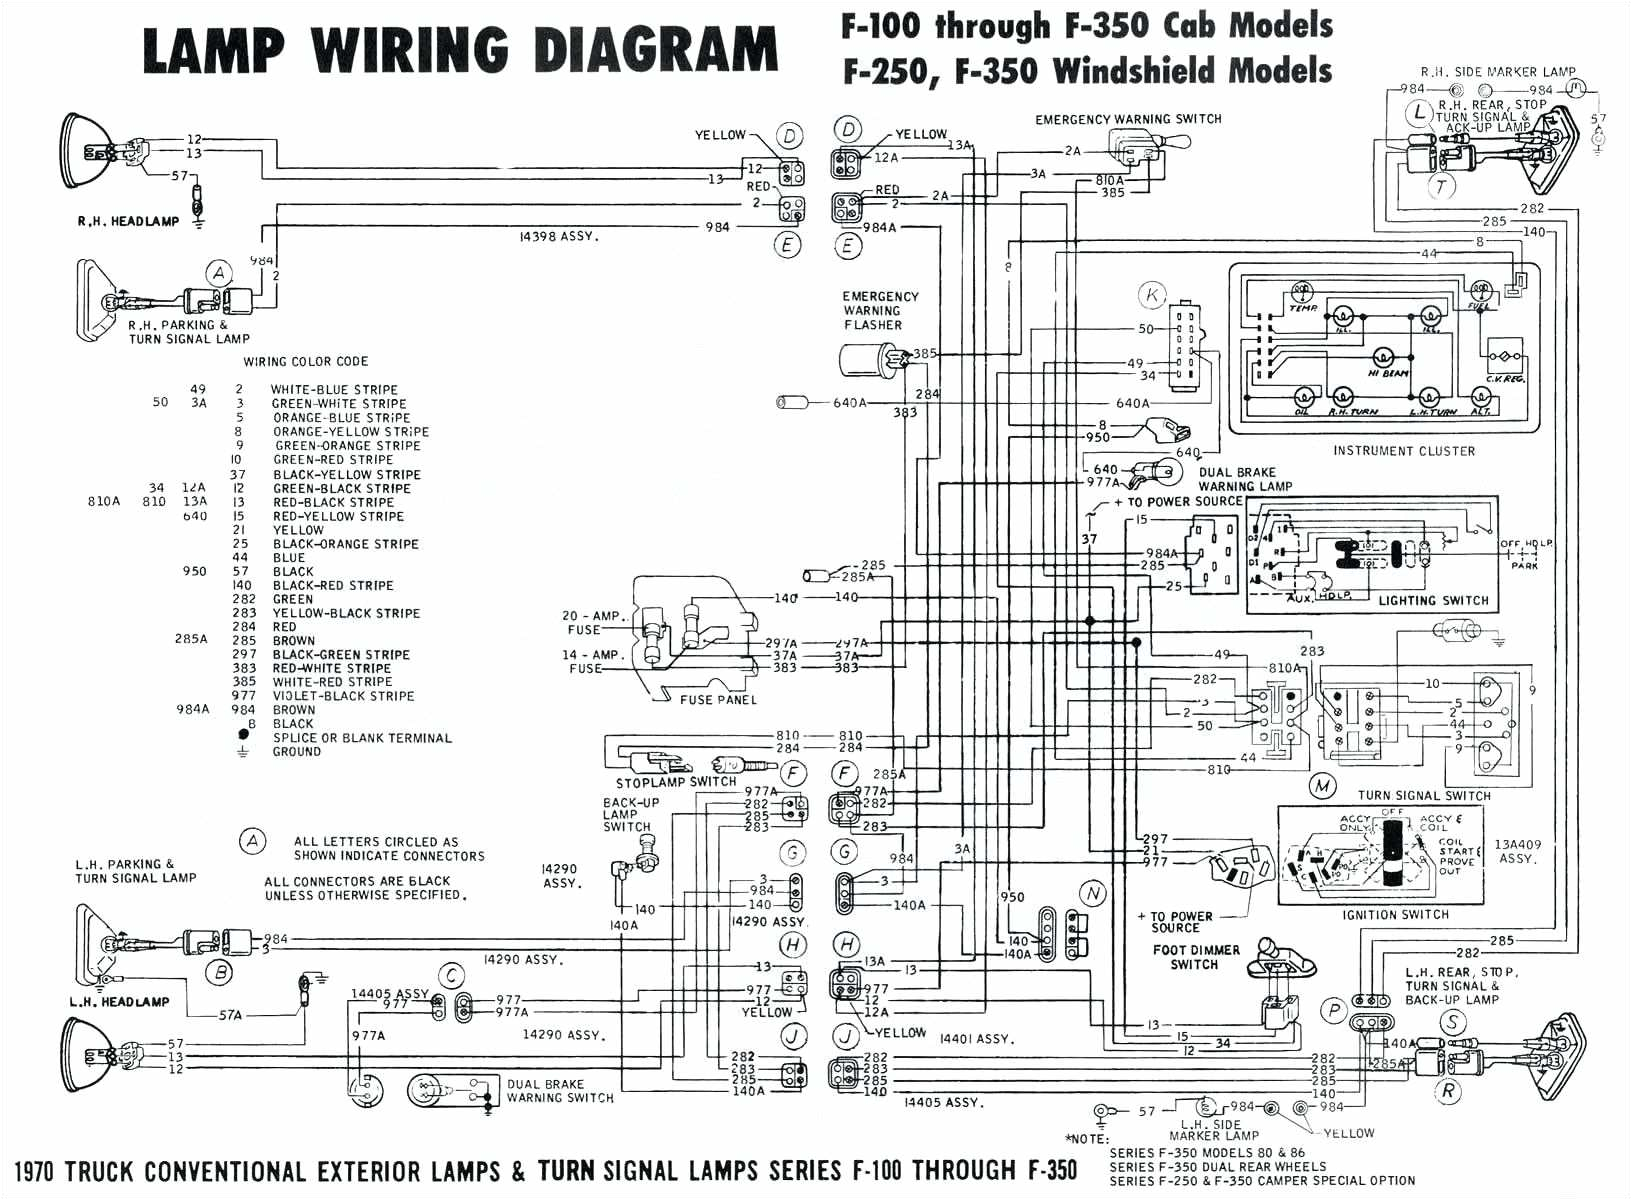 2014 nissan frontier stereo wiring diagram new 1992 jeep wrangler audio wiring diagram schematic diagrams of 2014 nissan frontier stereo wiring diagram jpg